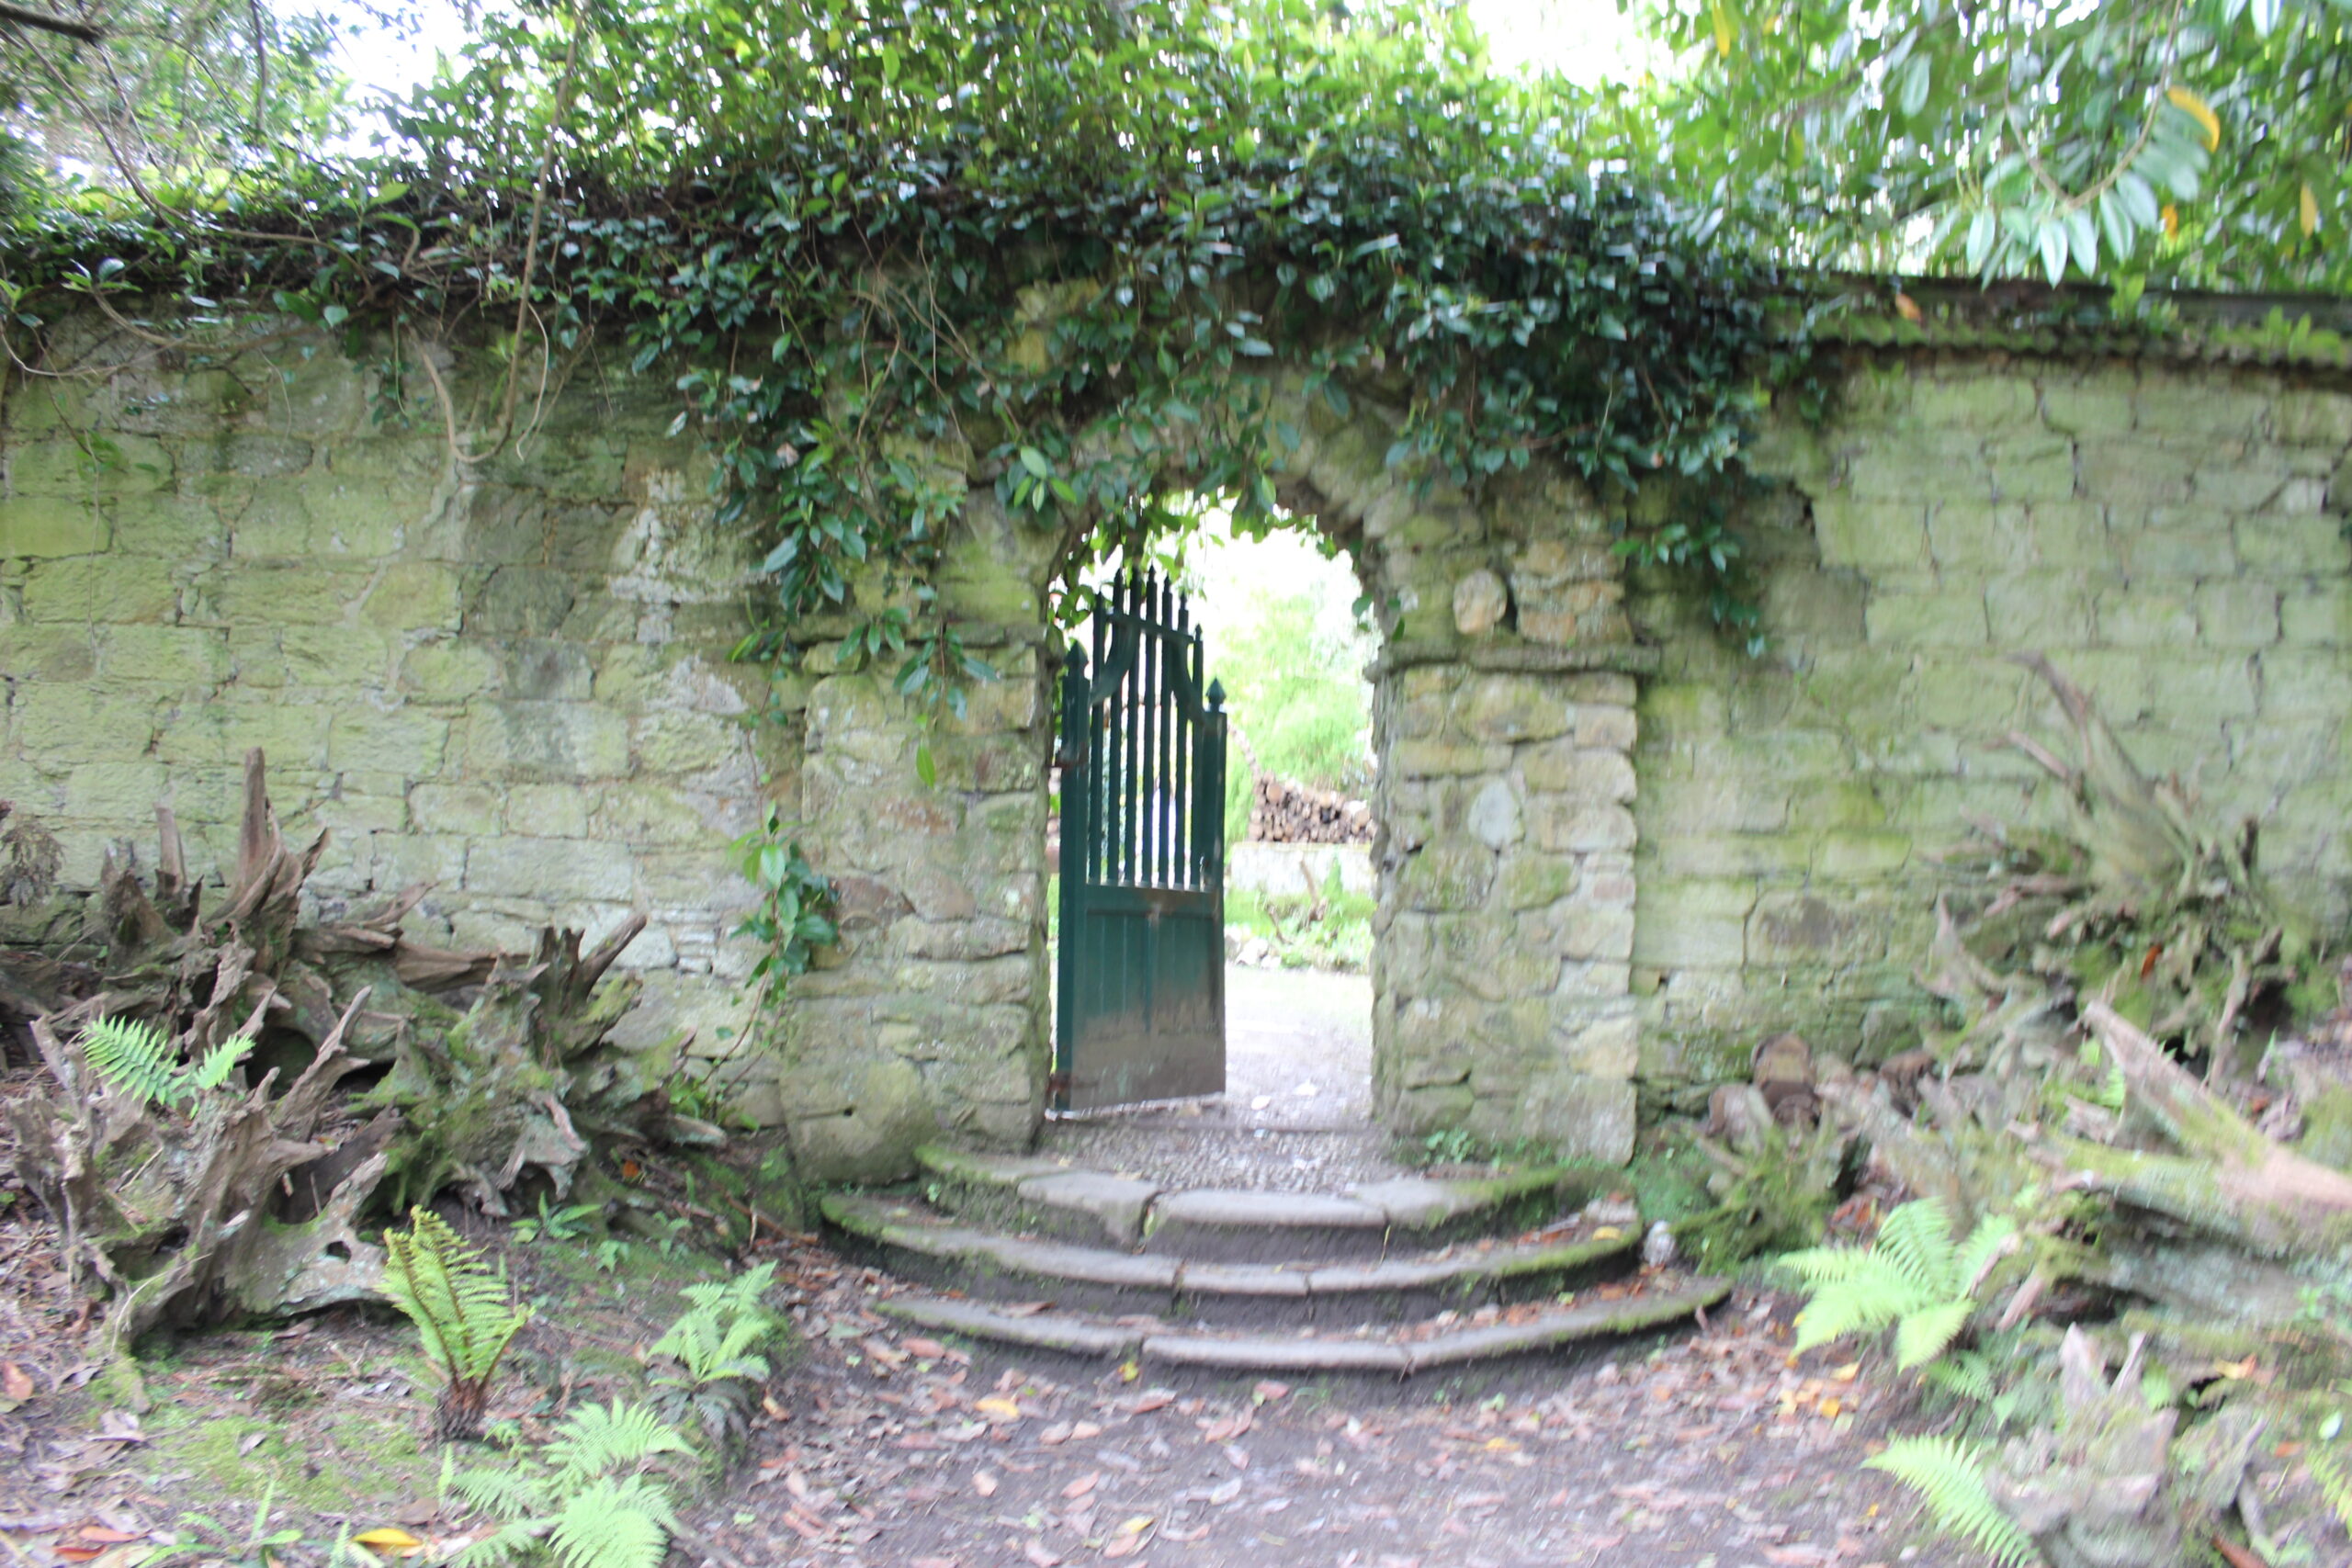 Entrance to the Walled Garden from Parc Lye at Enys Gardens. There are three curved steps to an arched doorway which leads to the garden.